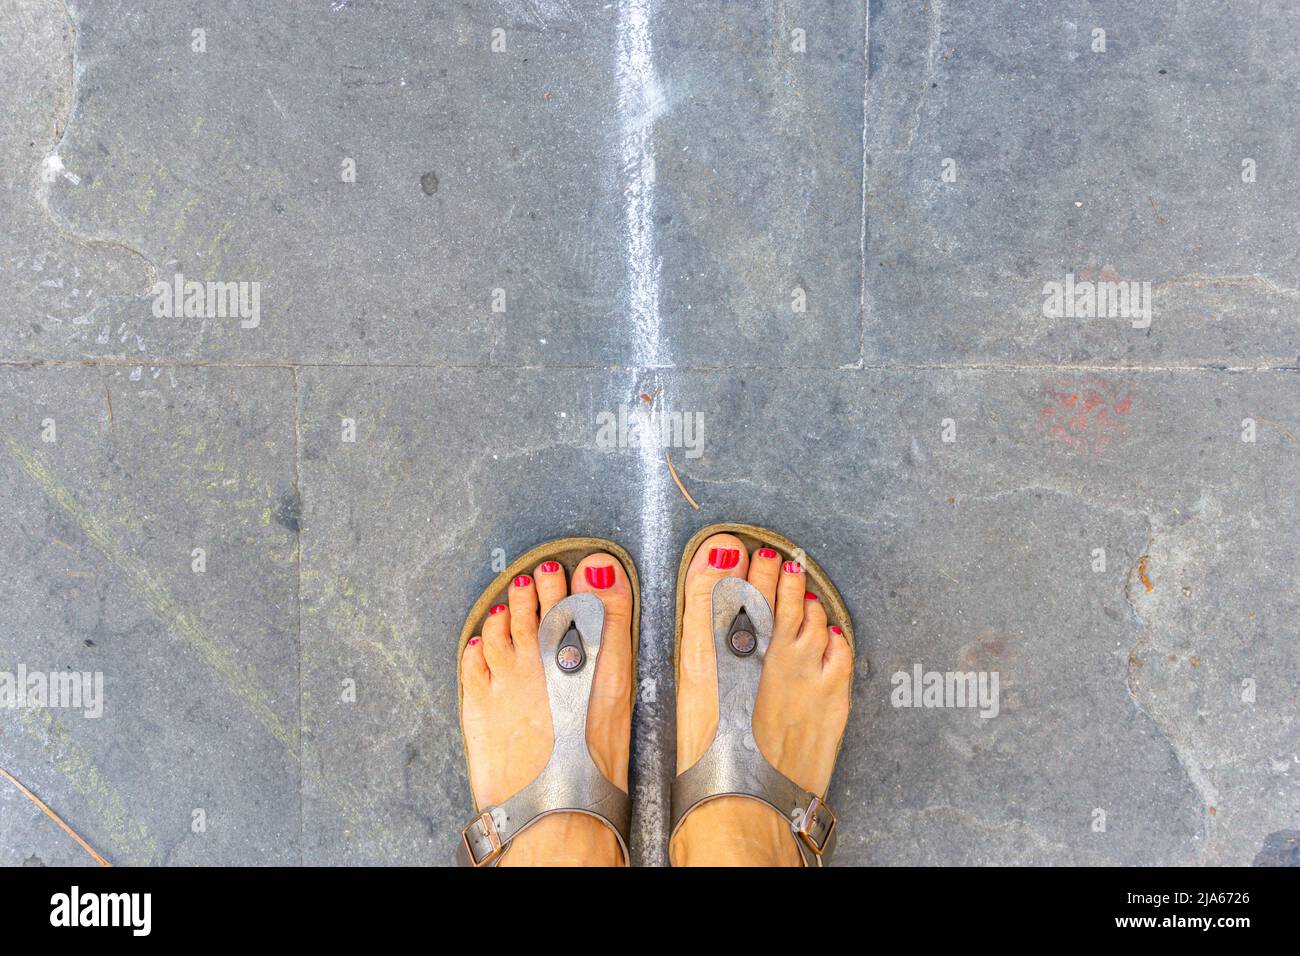 Grado, Italy - July 8, 2021: Feet in open sandals with red nail polish on toes Stock Photo